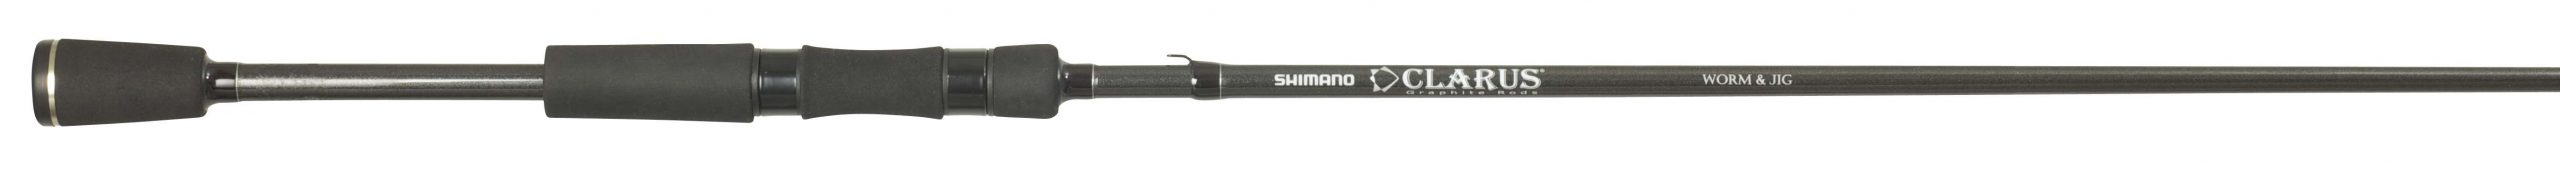 <p>
	<strong>Shimano Clarus</strong><br />
	Nearly every line of Shimano rods received an upgrade this year, and the Clarus is no exception. The graphite has been upgraded from IM7 to IM8 which translates to a lighter, more sensitive and "crisp" feeling rod. It's also made with aluminum oxide guides and a threadless reel capture that makes long days on the water more comfortable.</p>
